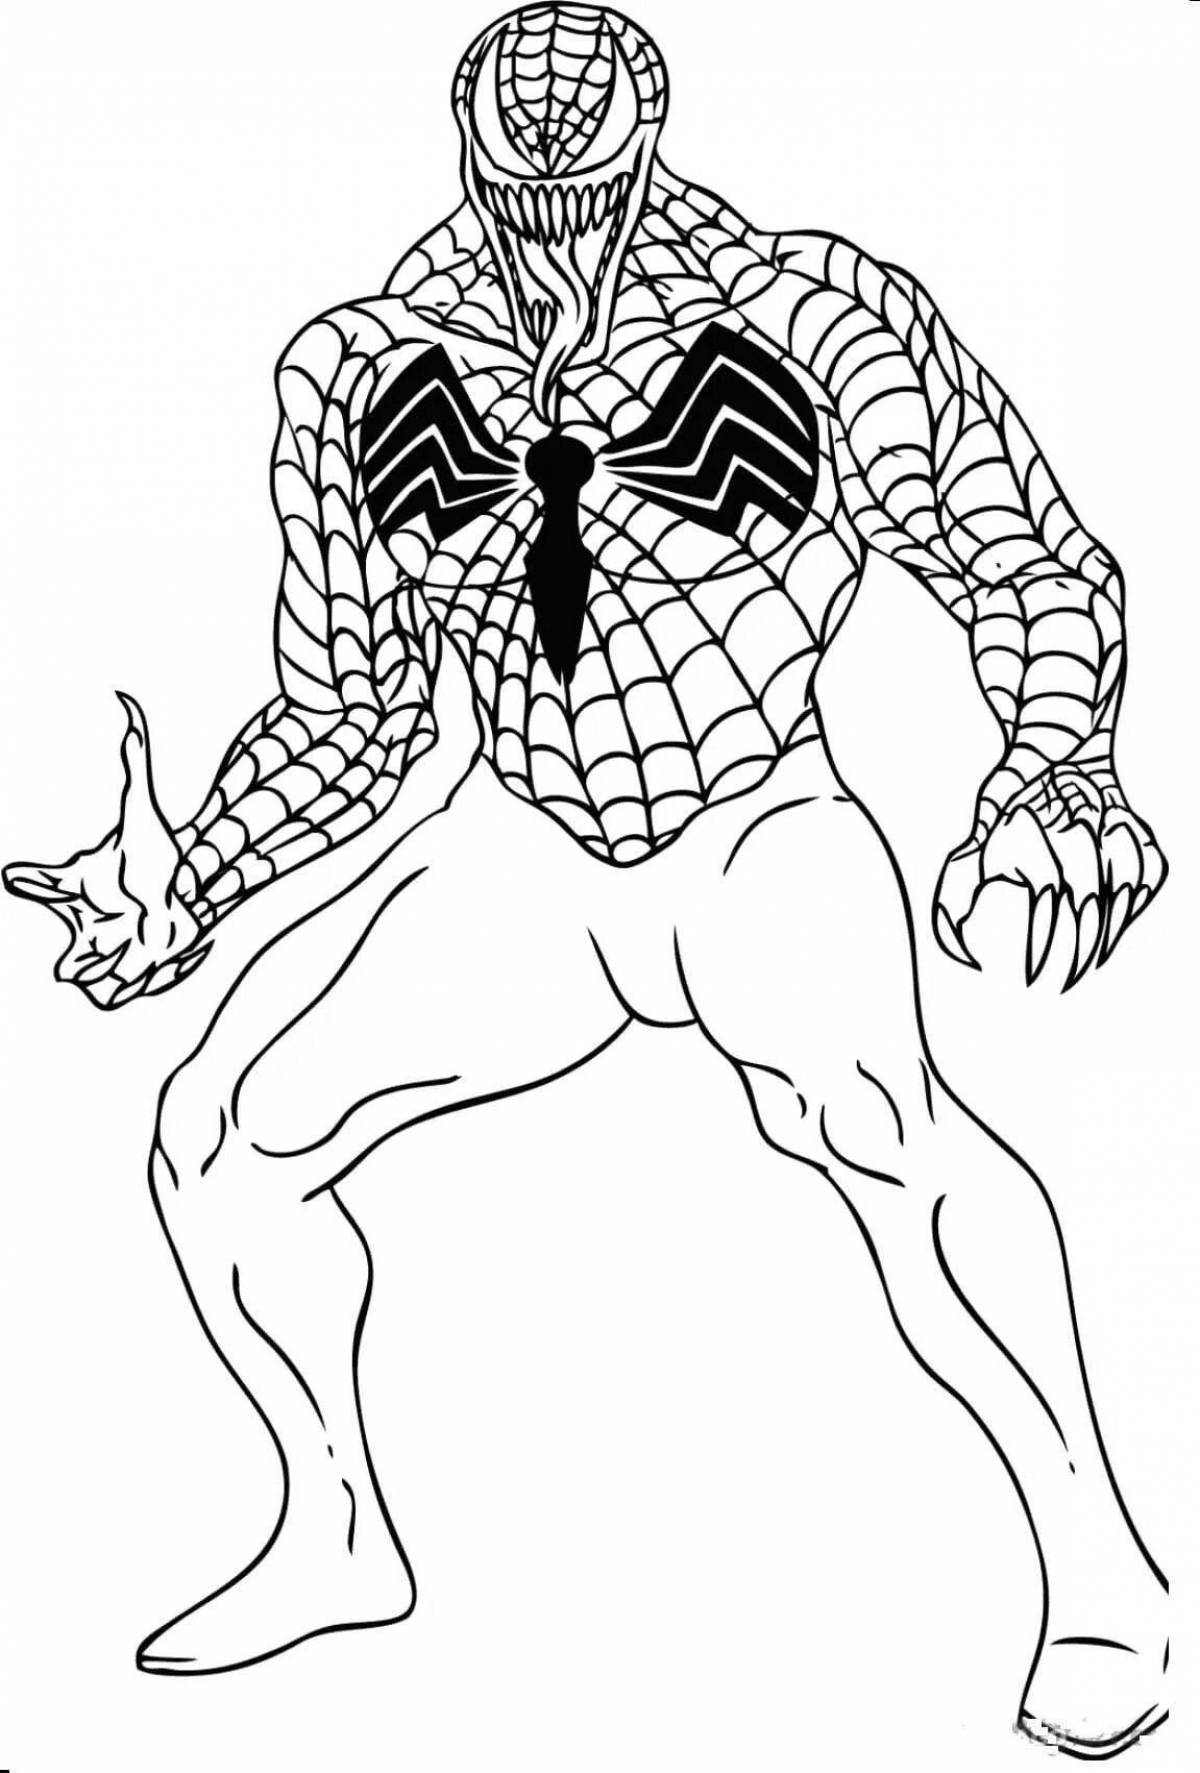 Coloring page adorable zombie spiderman